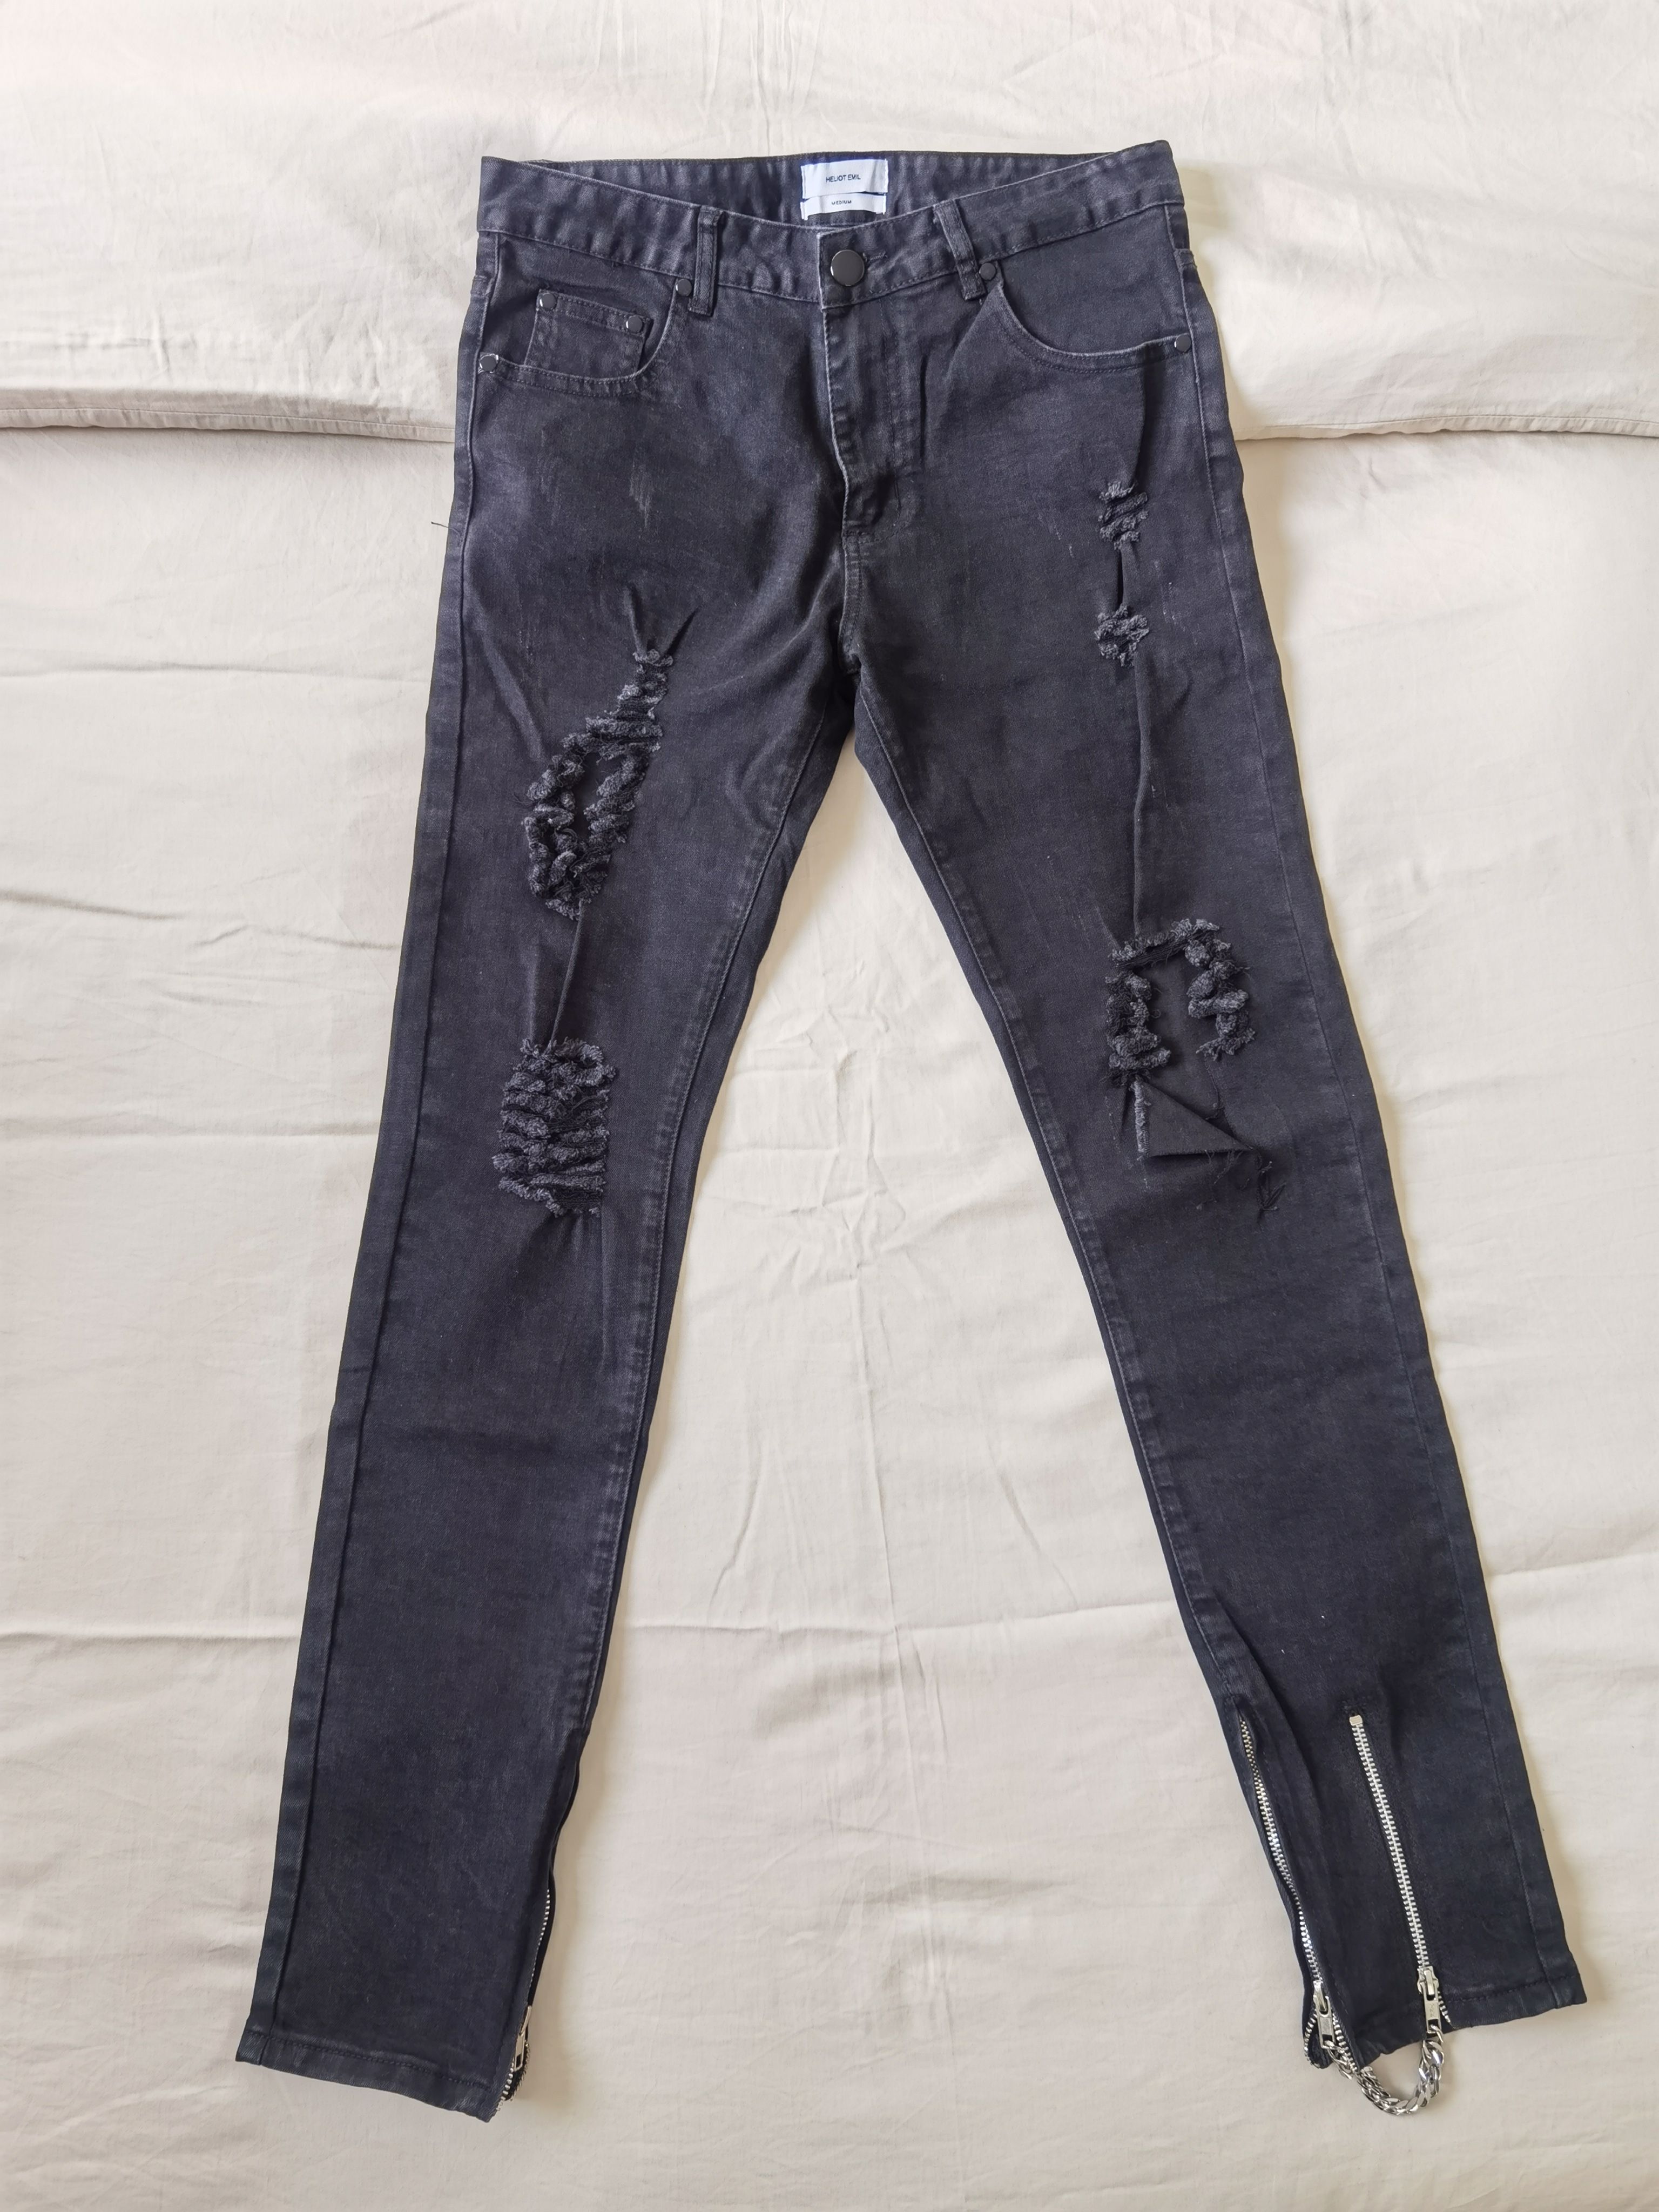 Heliot Emil Ripped Denim Pants with side Zippers - 8